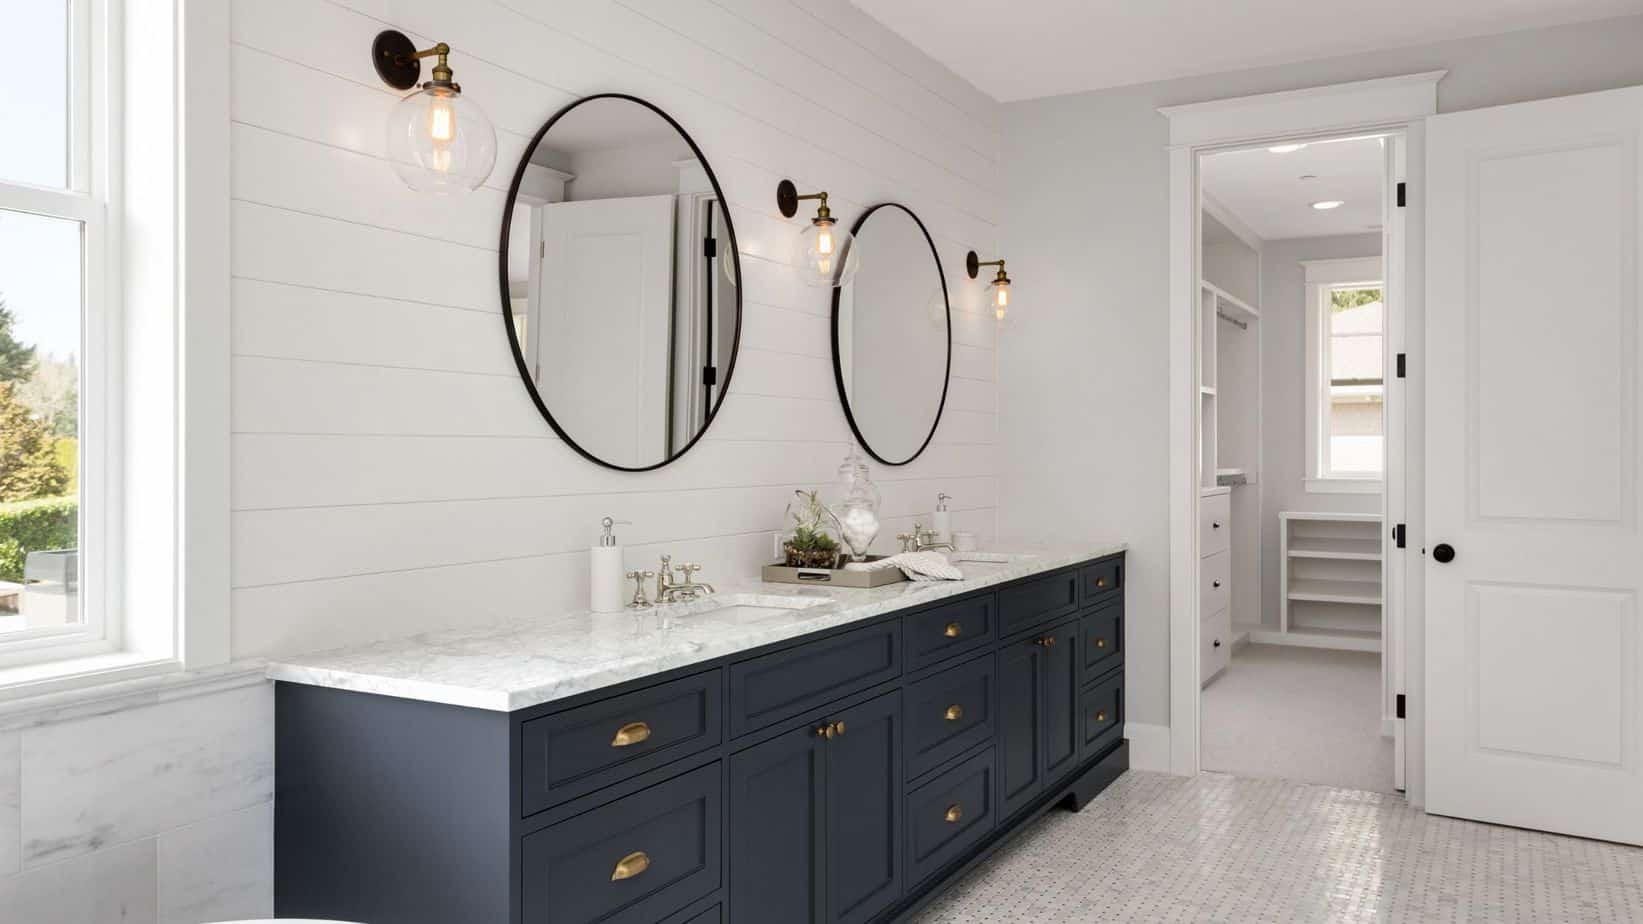 Why you should remodel your bathroom